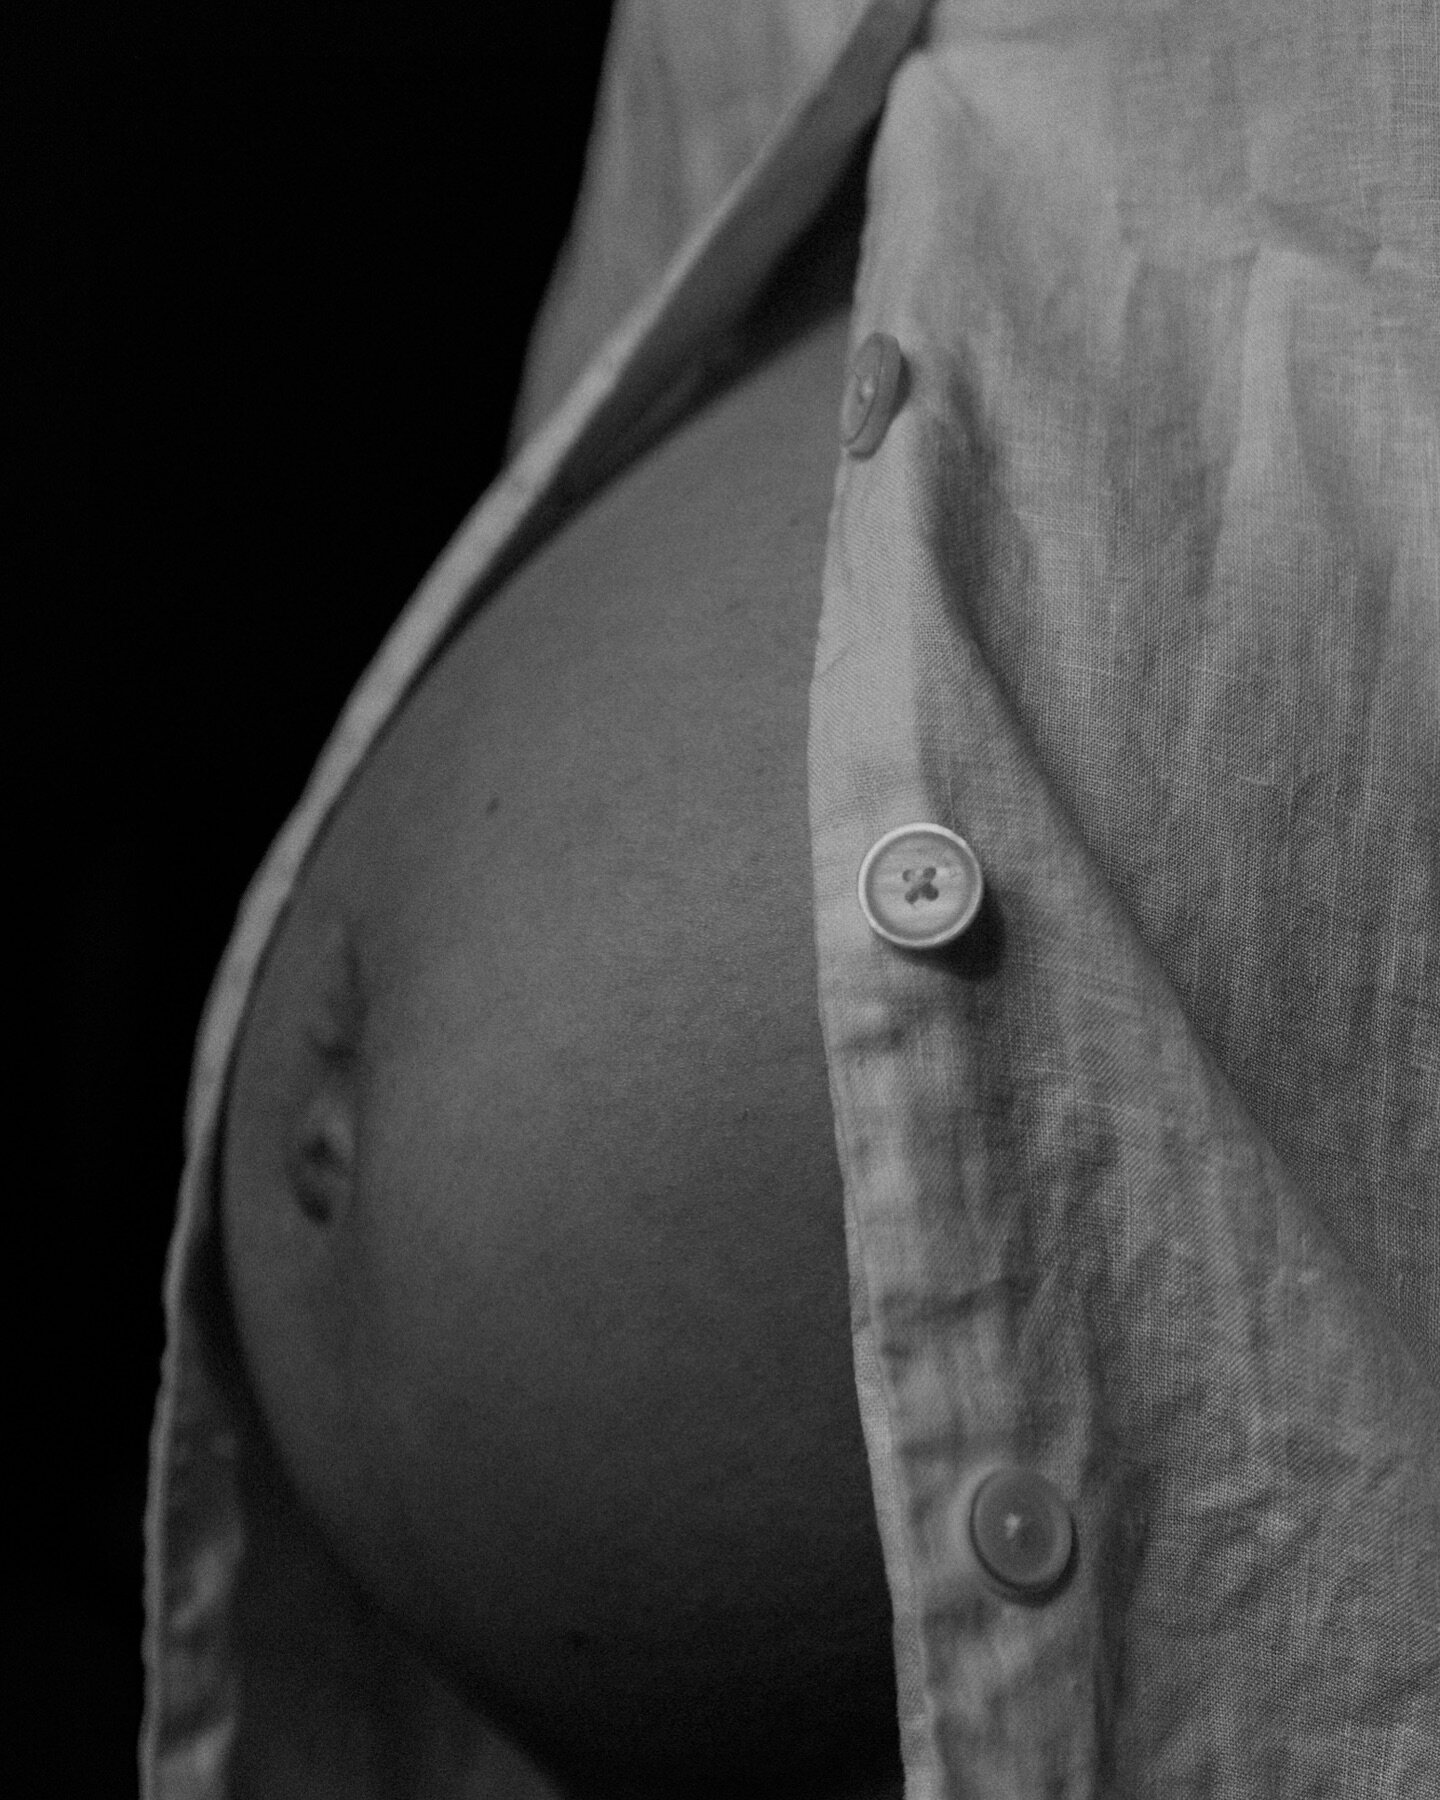 A moment for this belly. 😌

Having fun with self-portraits while I have this big ole bump as a prop.

Taken at #30weeks #pregnant.